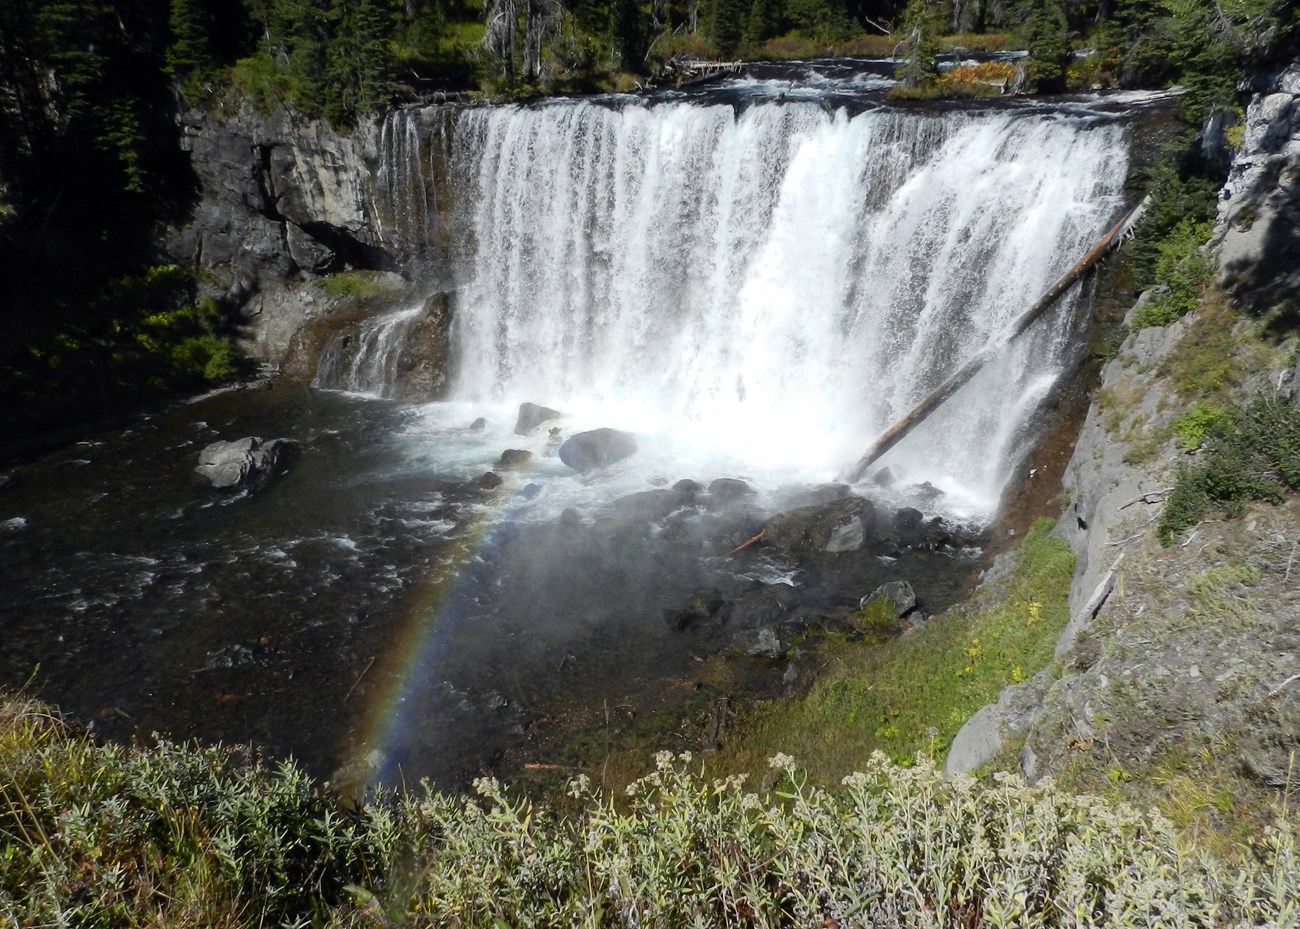 A wide waterfall drops over a gray rock cliff with a rainbow glowing in the spray.